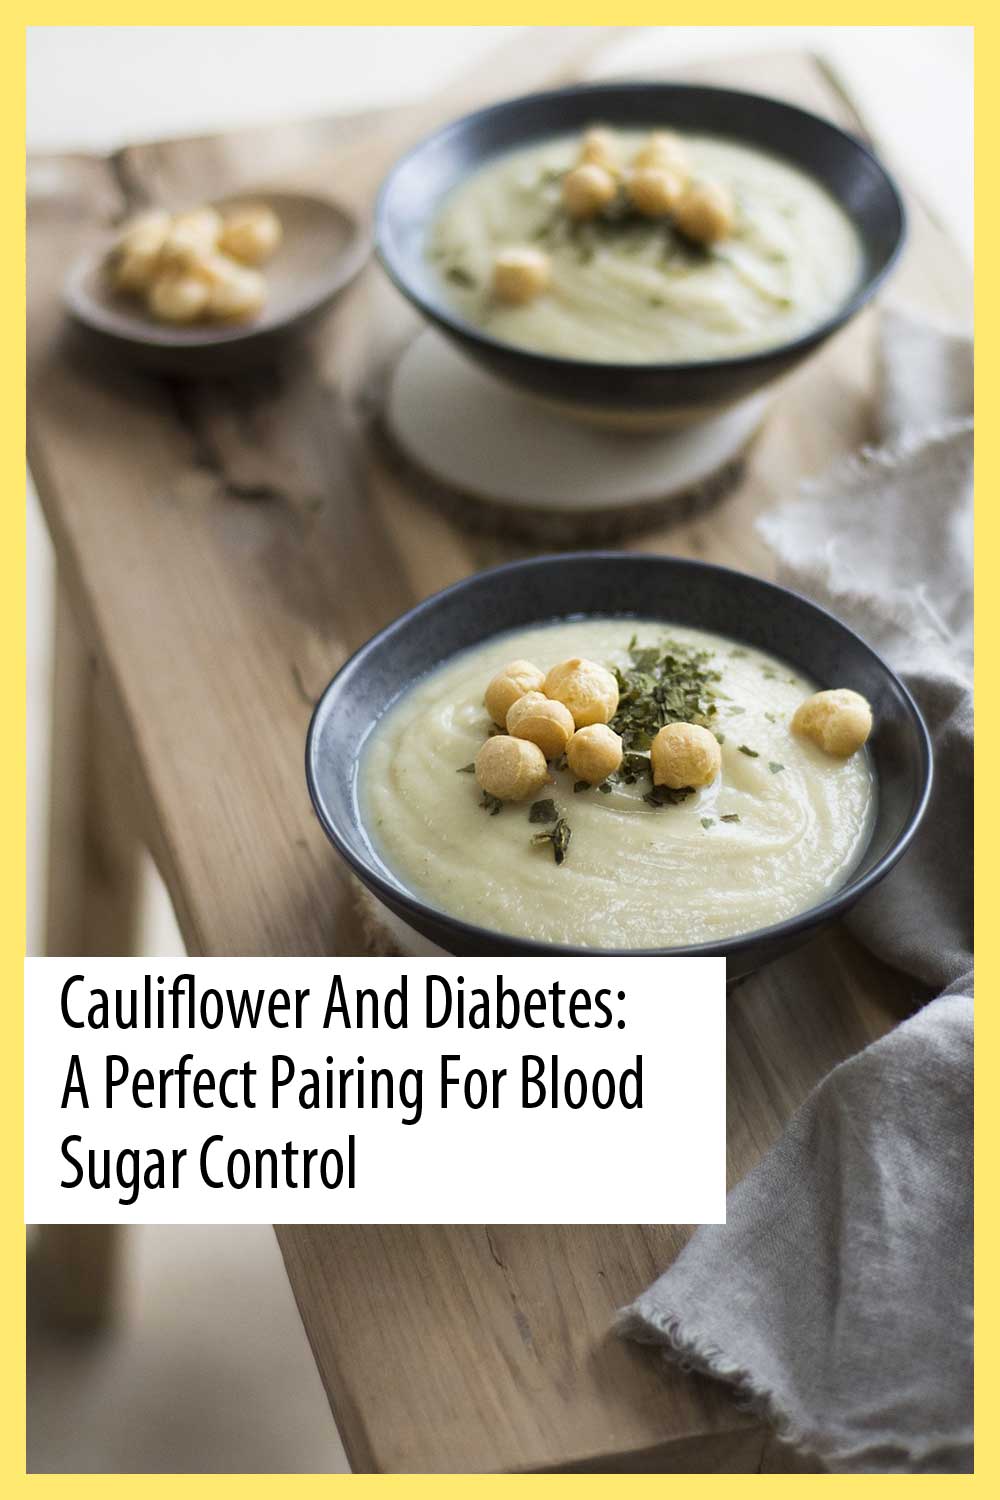 Cauliflower and Diabetes: A Perfect Pairing for Blood Sugar Control